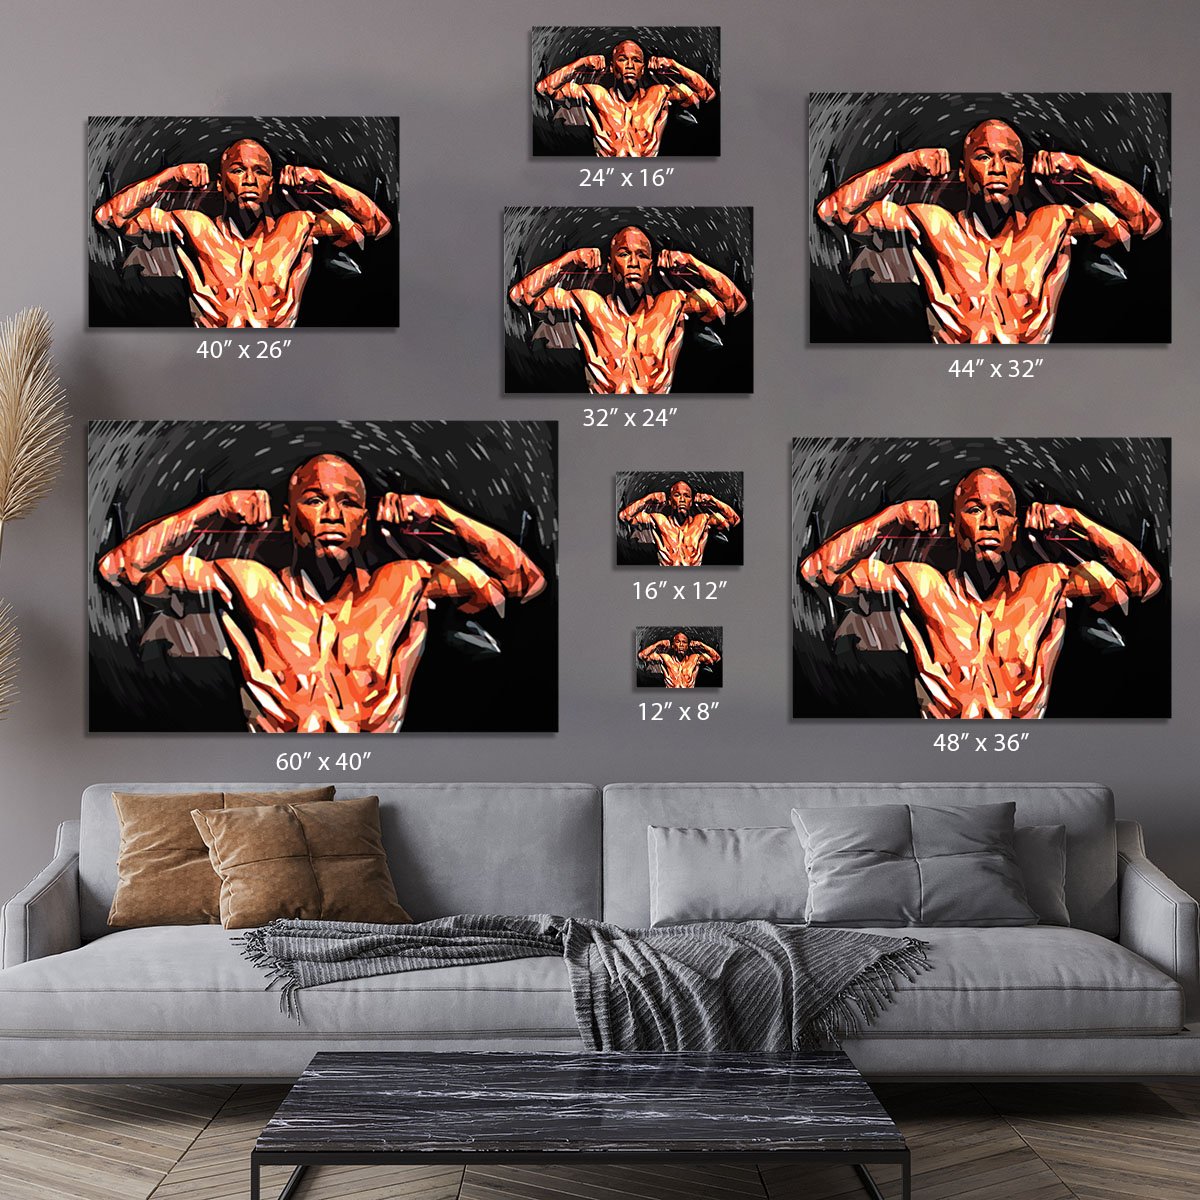 Floyd Mayweather Canvas Print or Poster